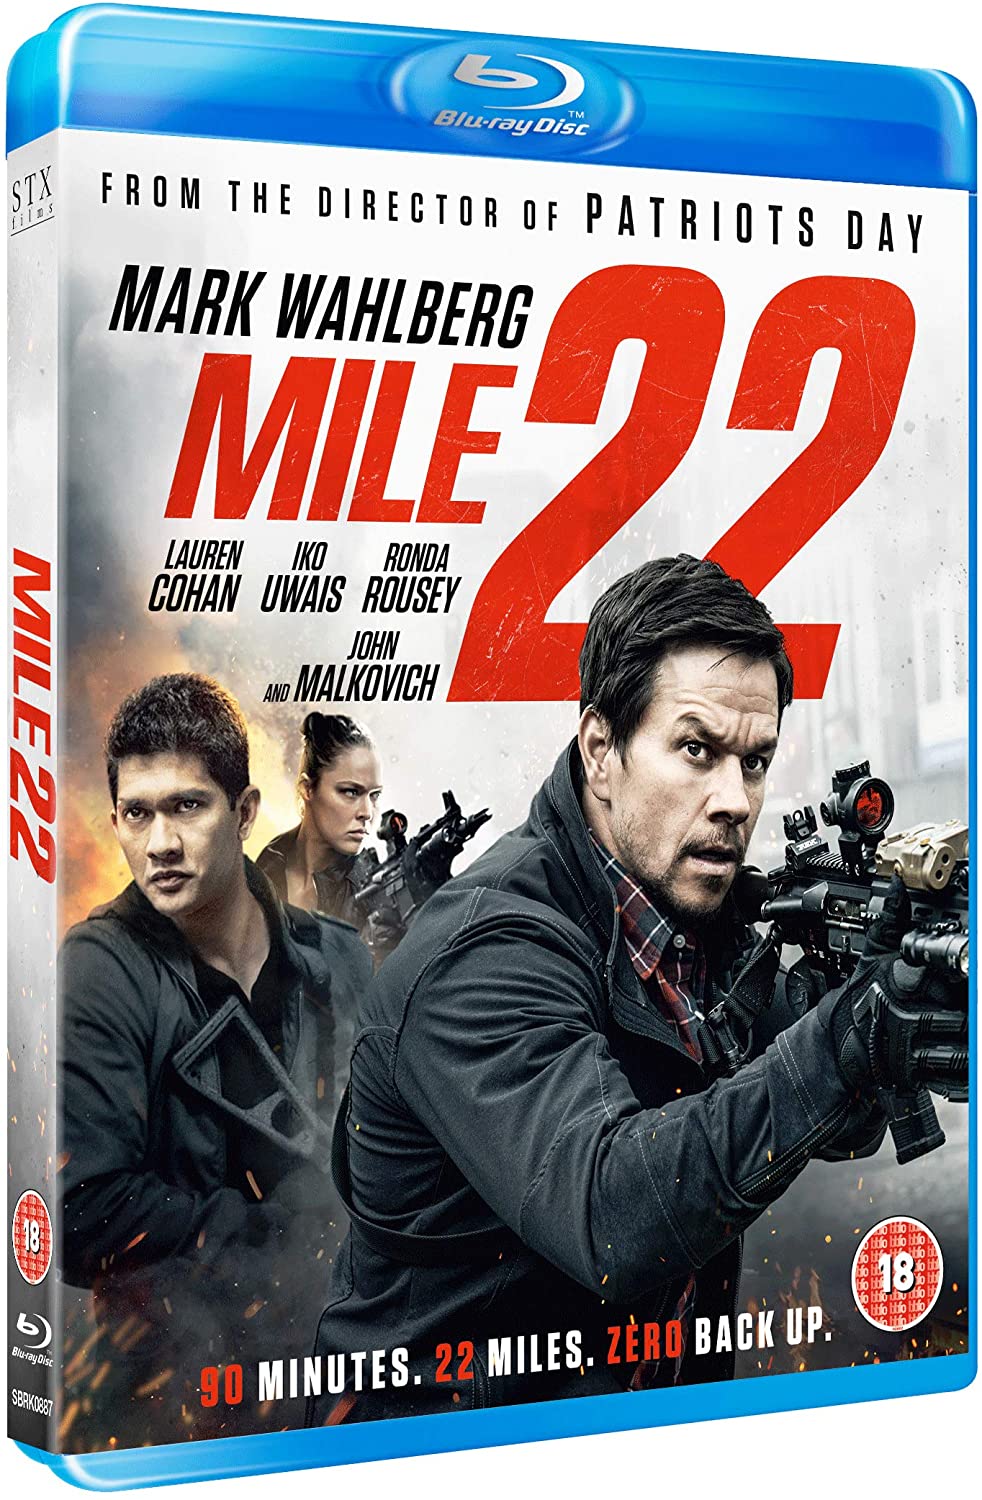 Meile 22 – Action/Thriller [Blu-ray]